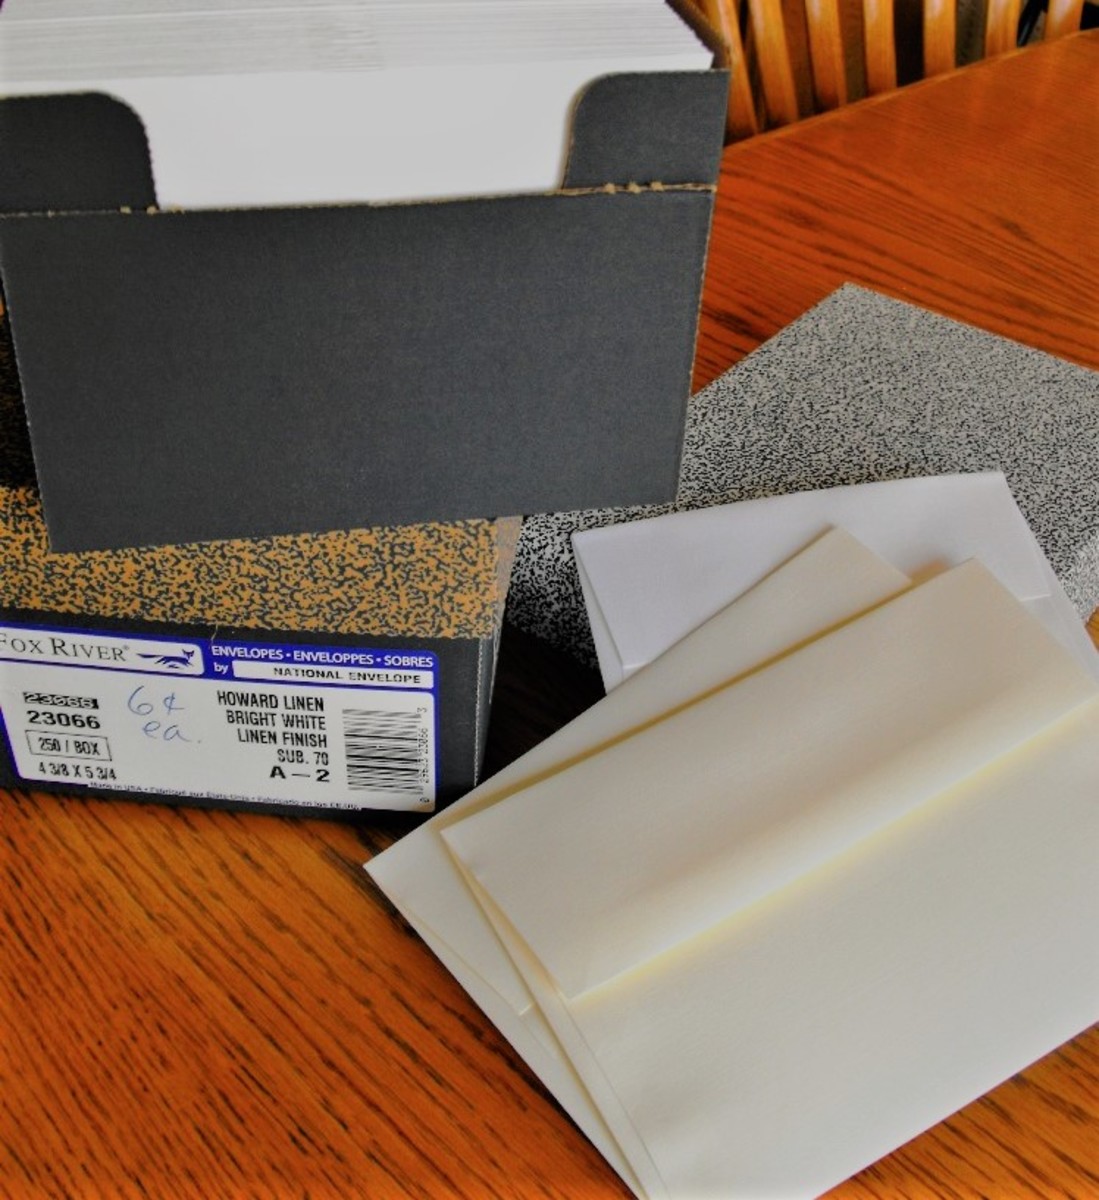 How to Make a Box Out of Cardstock - FeltMagnet